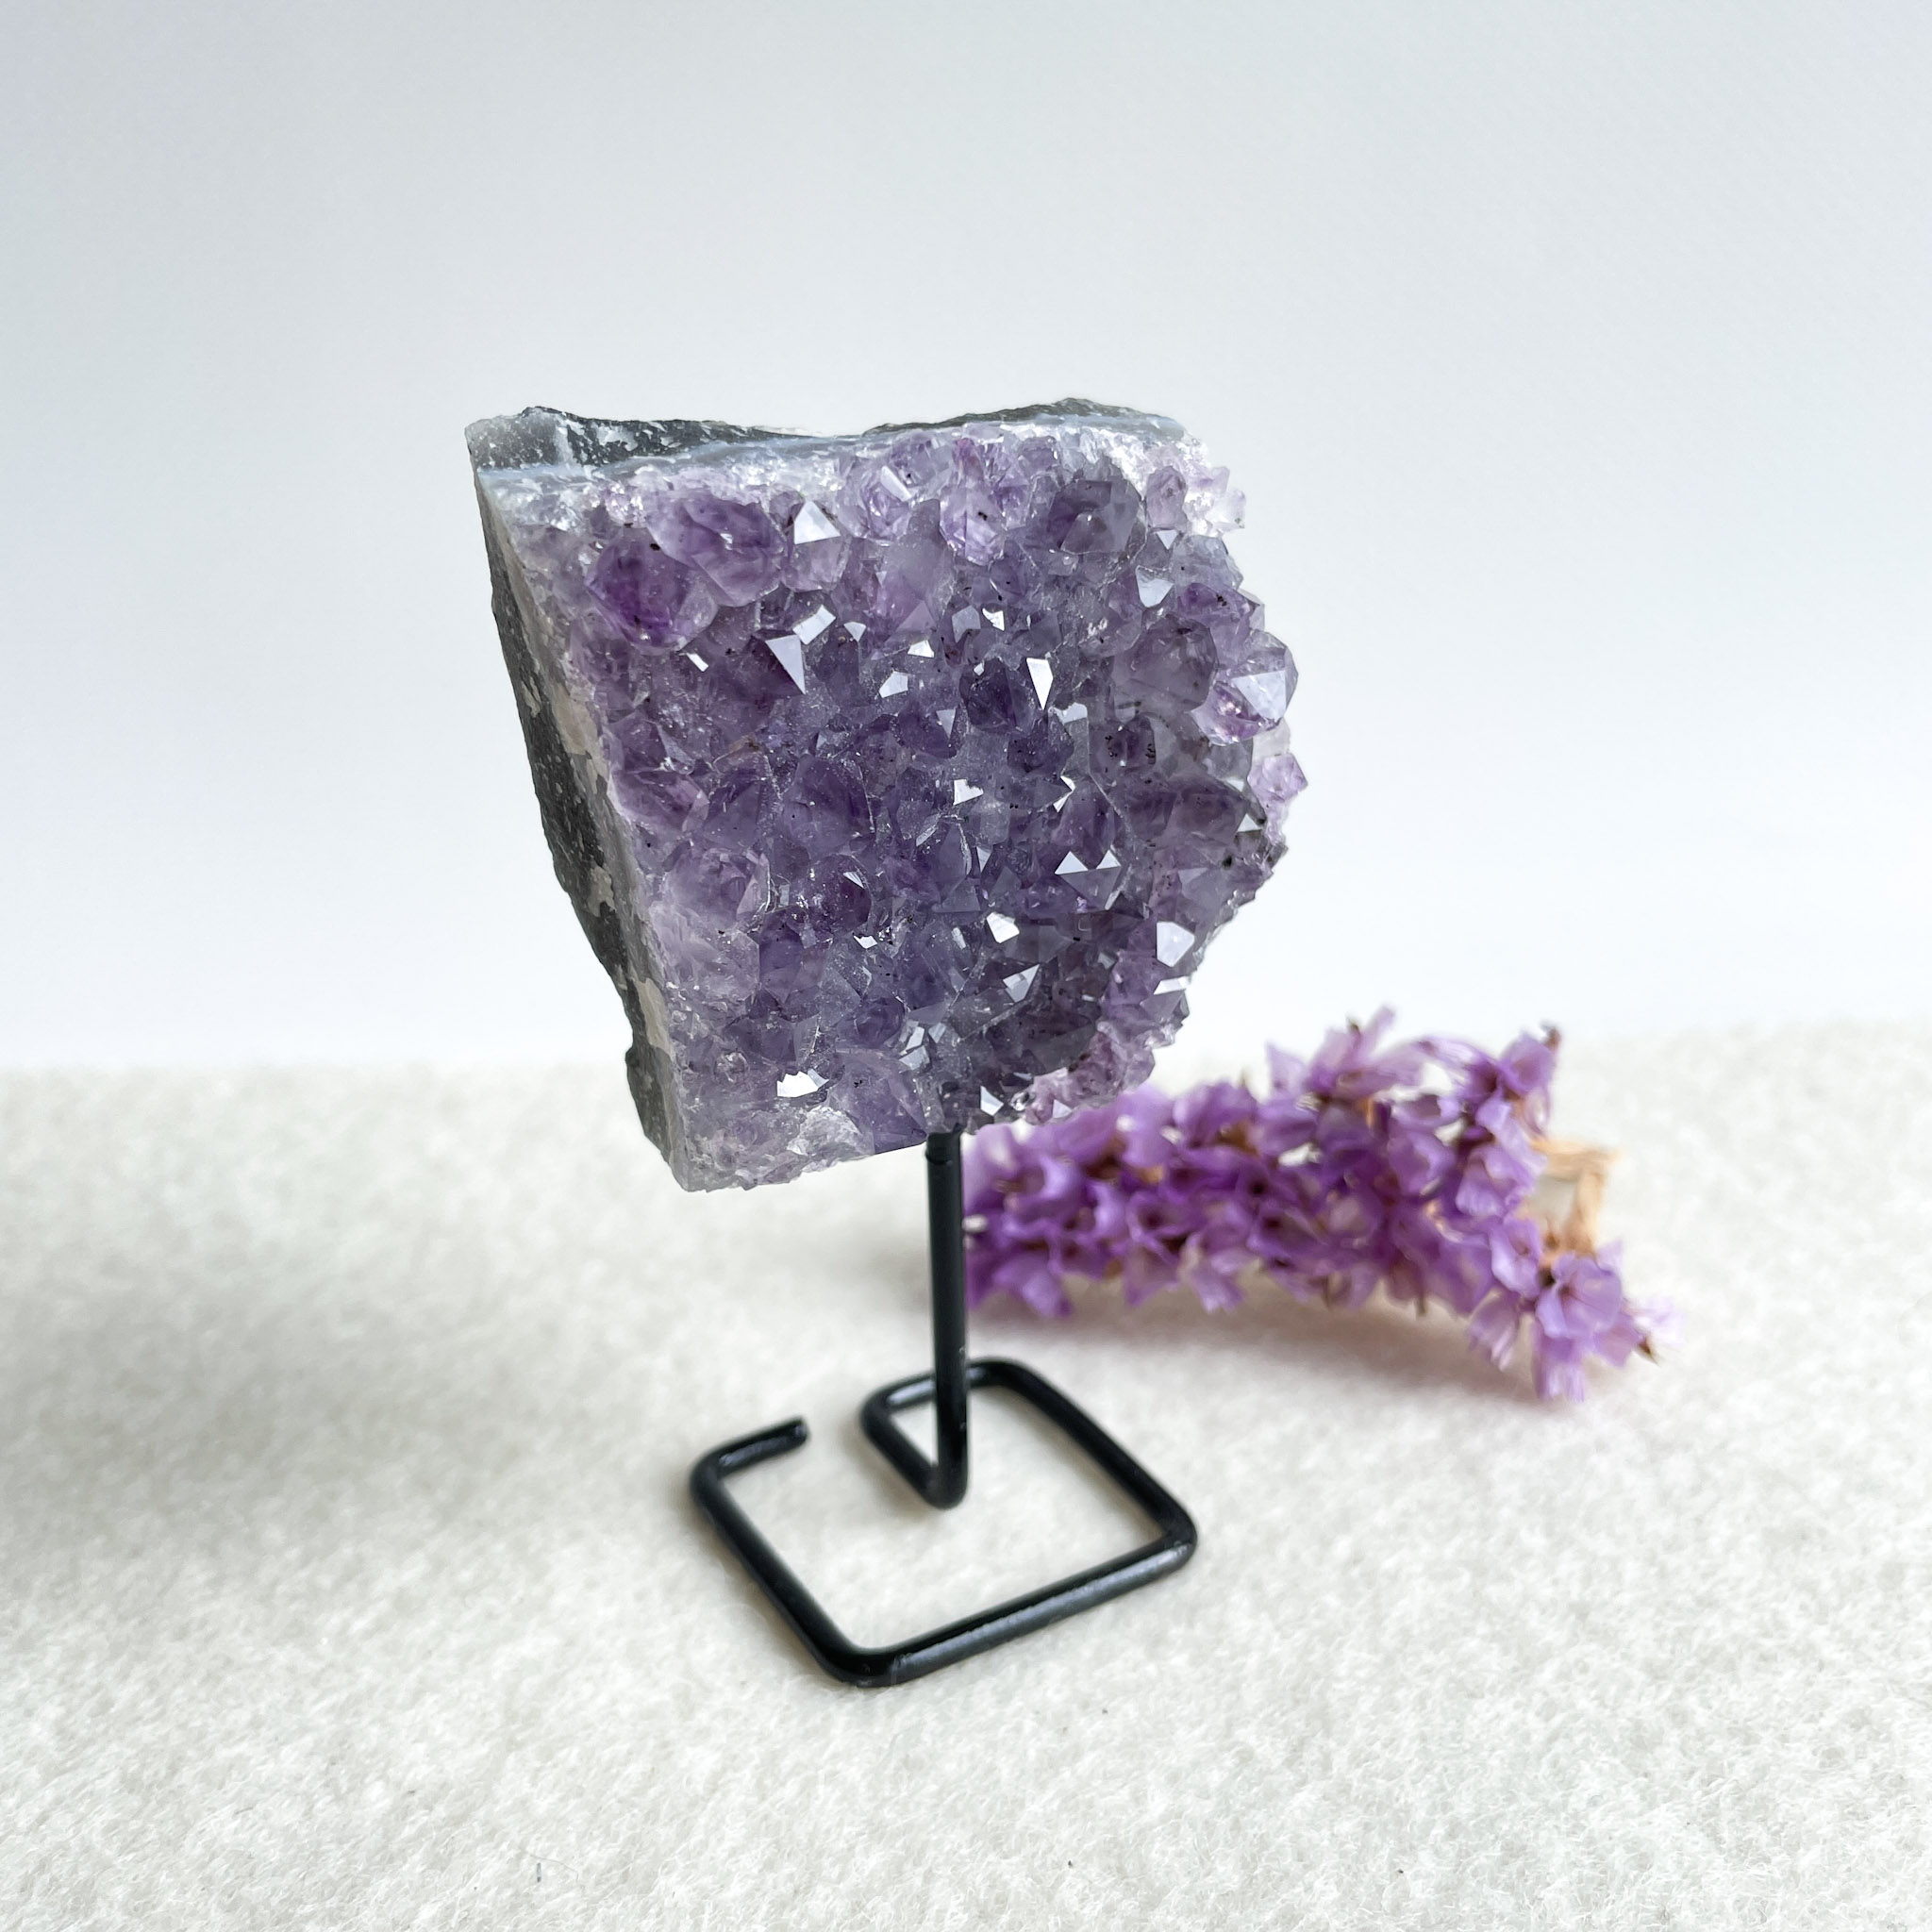 A vibrant purple amethyst geode displayed on a black metal stand, with a small bundle of purple dried flowers lying next to it against a white background.